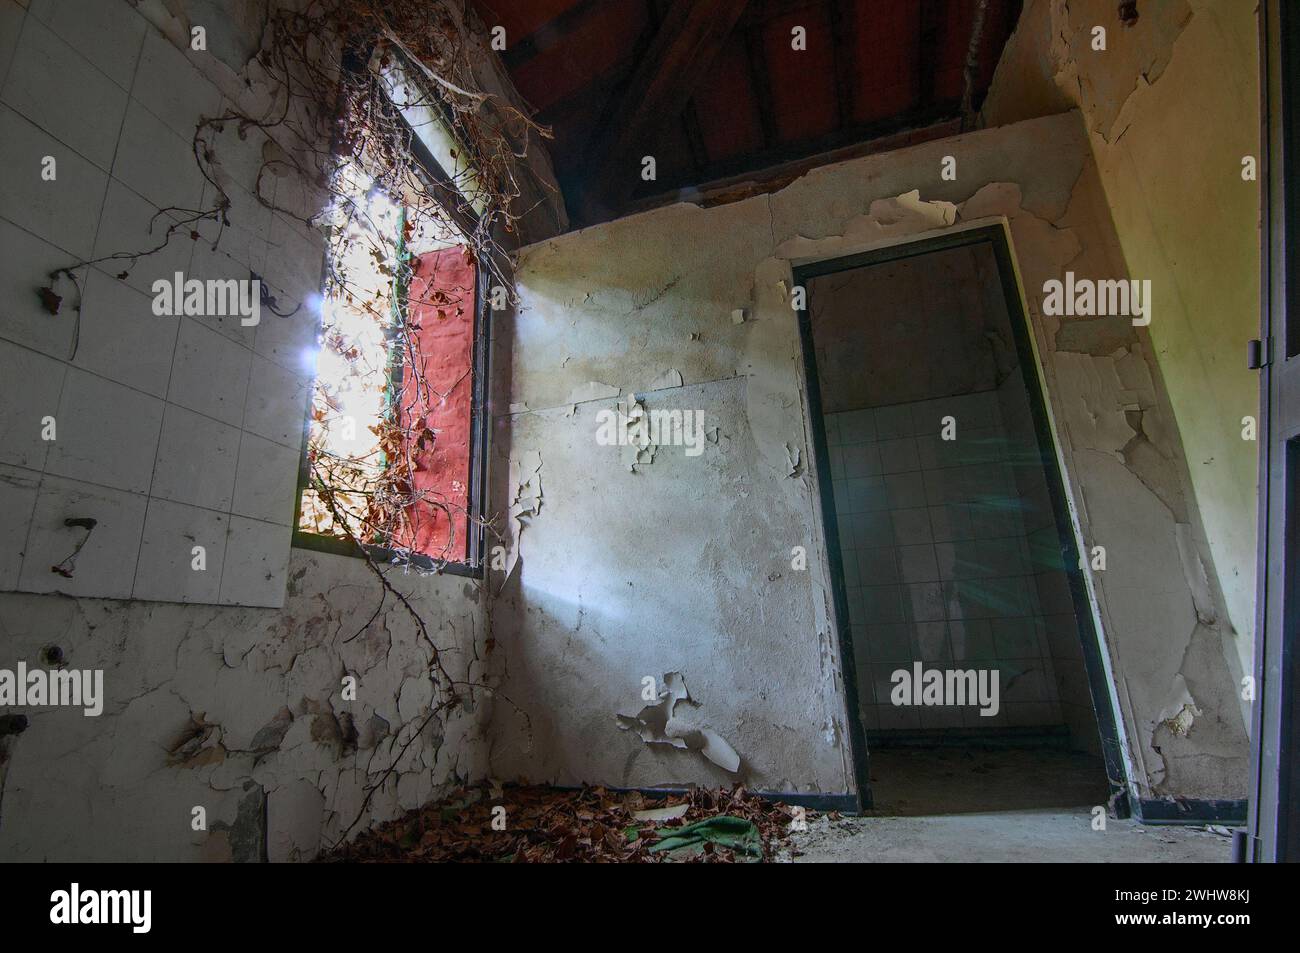 Interior of unsafe house in ruins Stock Photo